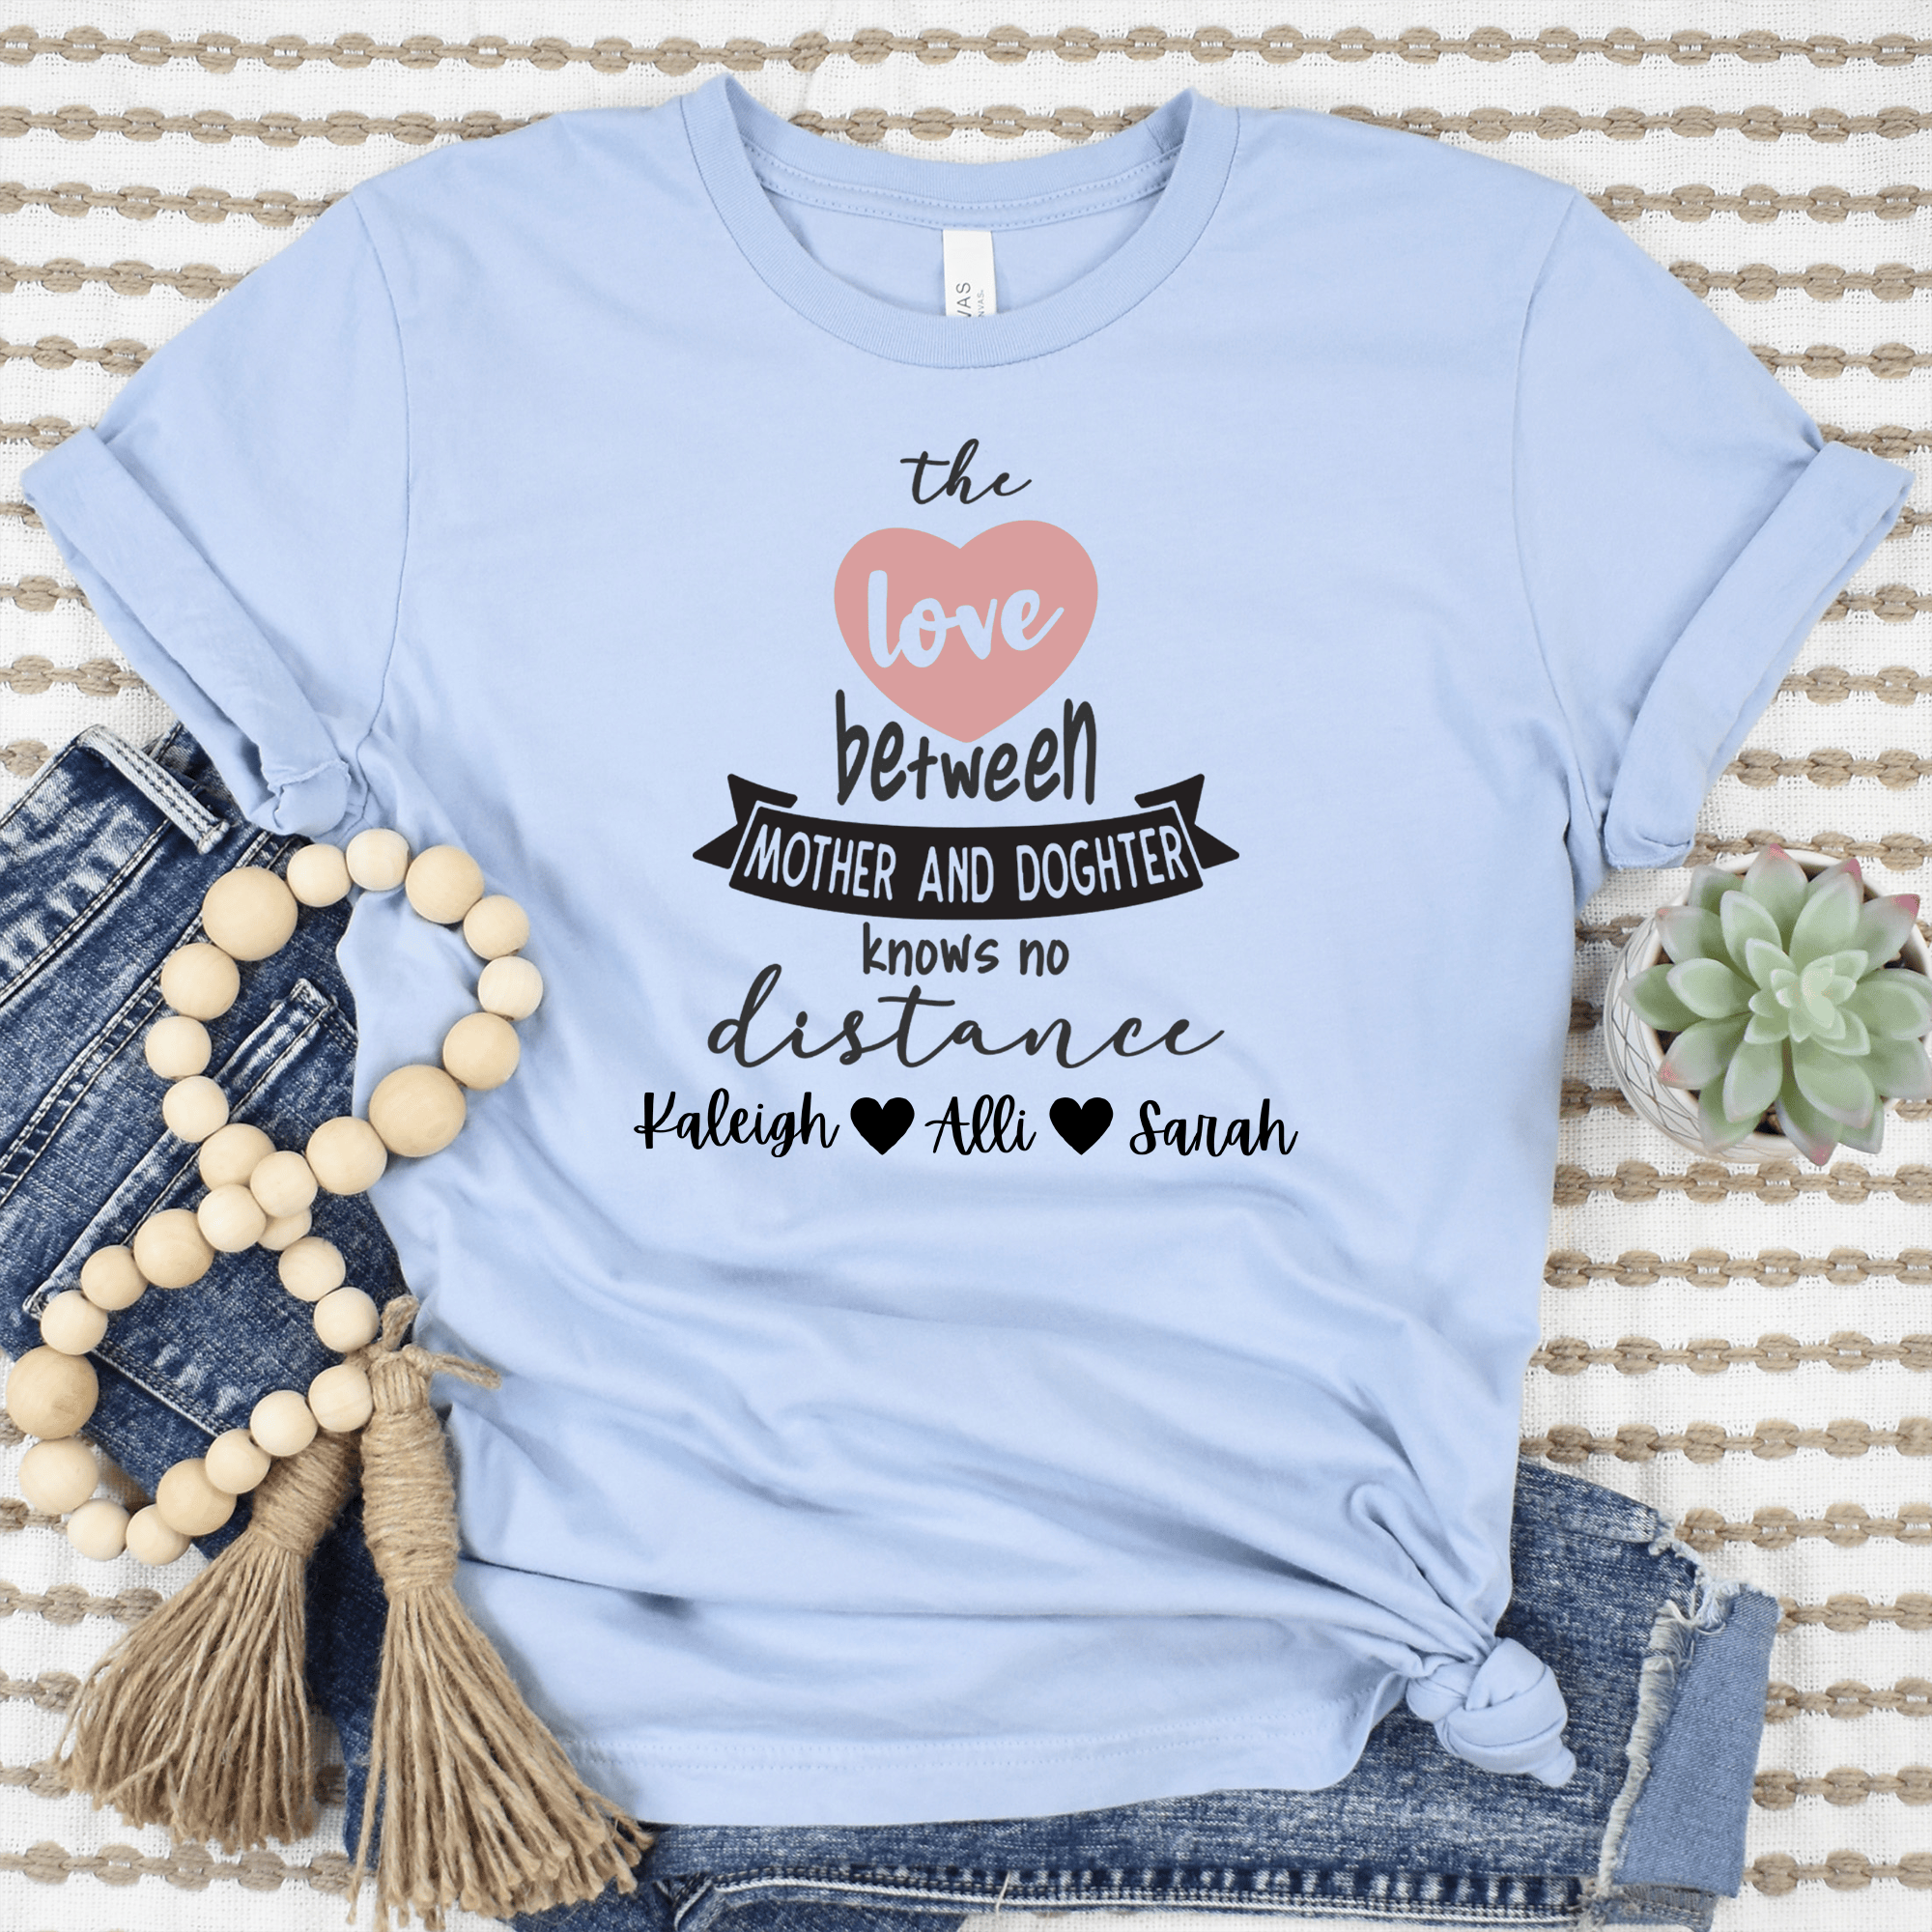 Womens Light Blue T Shirt with Mothers-And-Daughters design